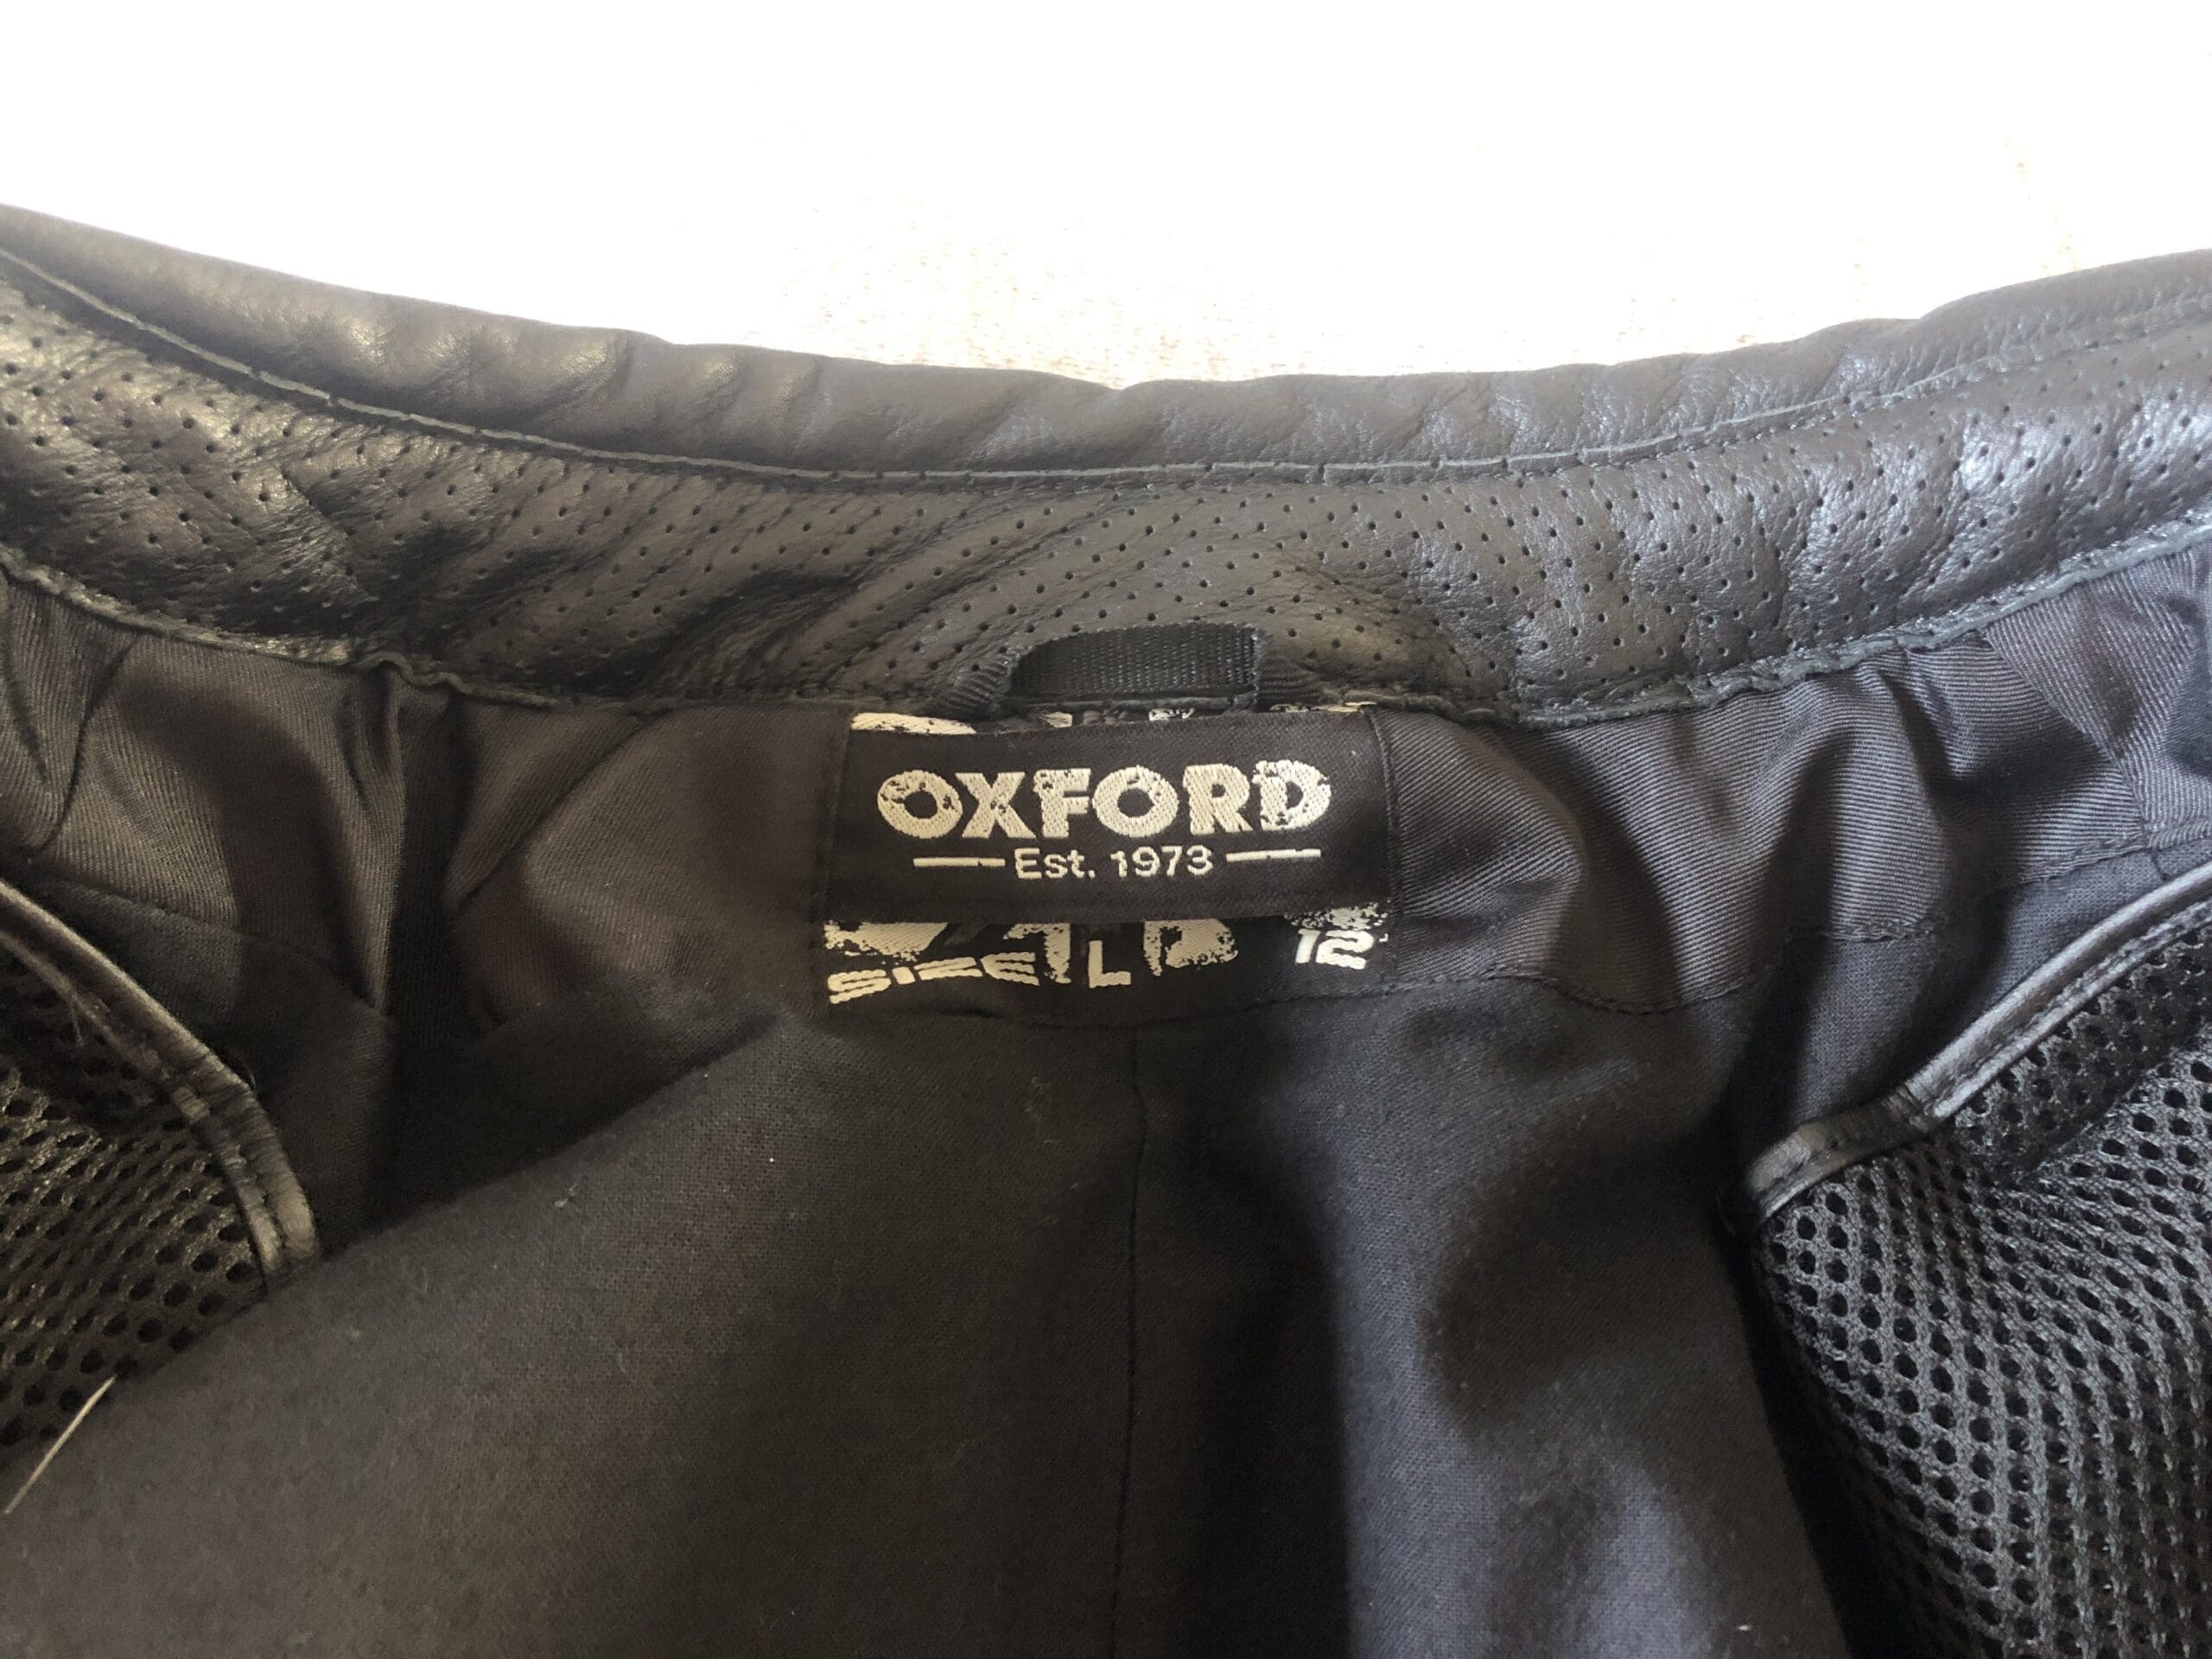 Interior tag of the jacket